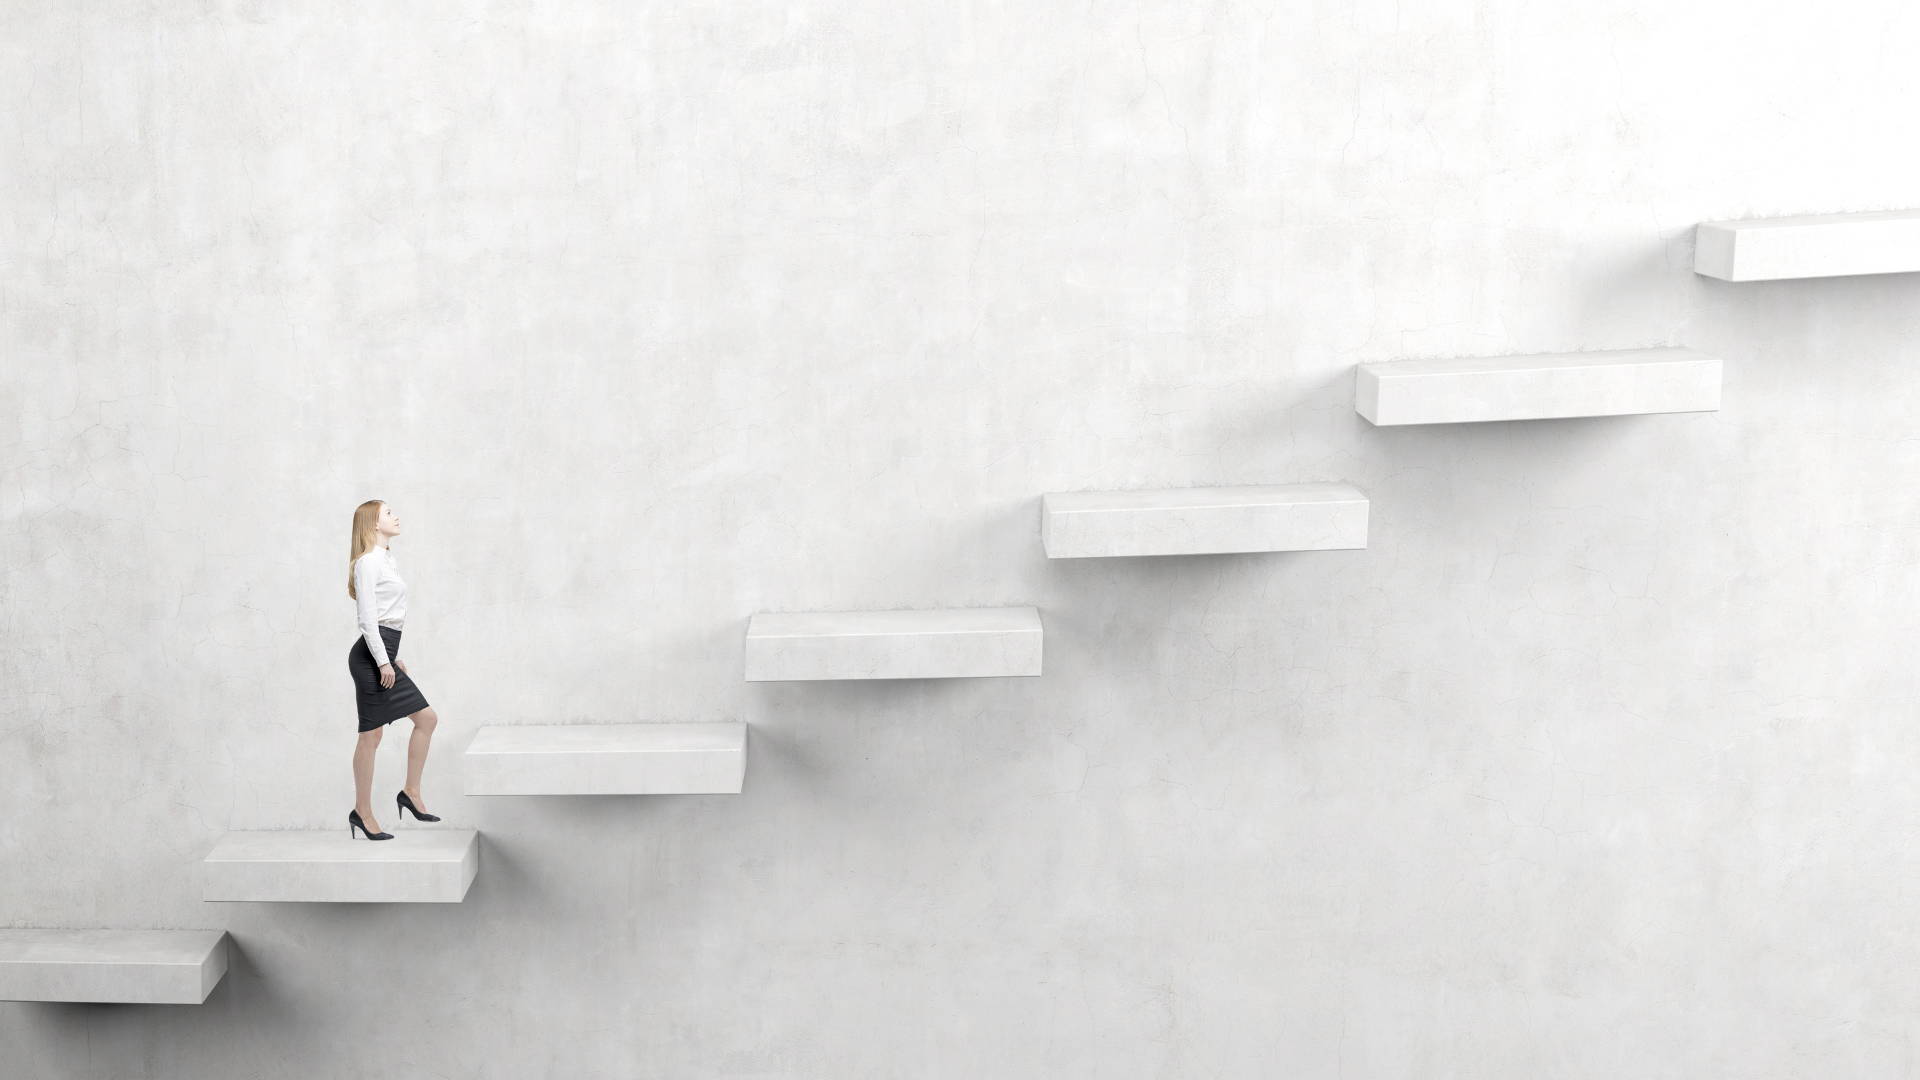 woman climbing up stairs, symbolizing career growth